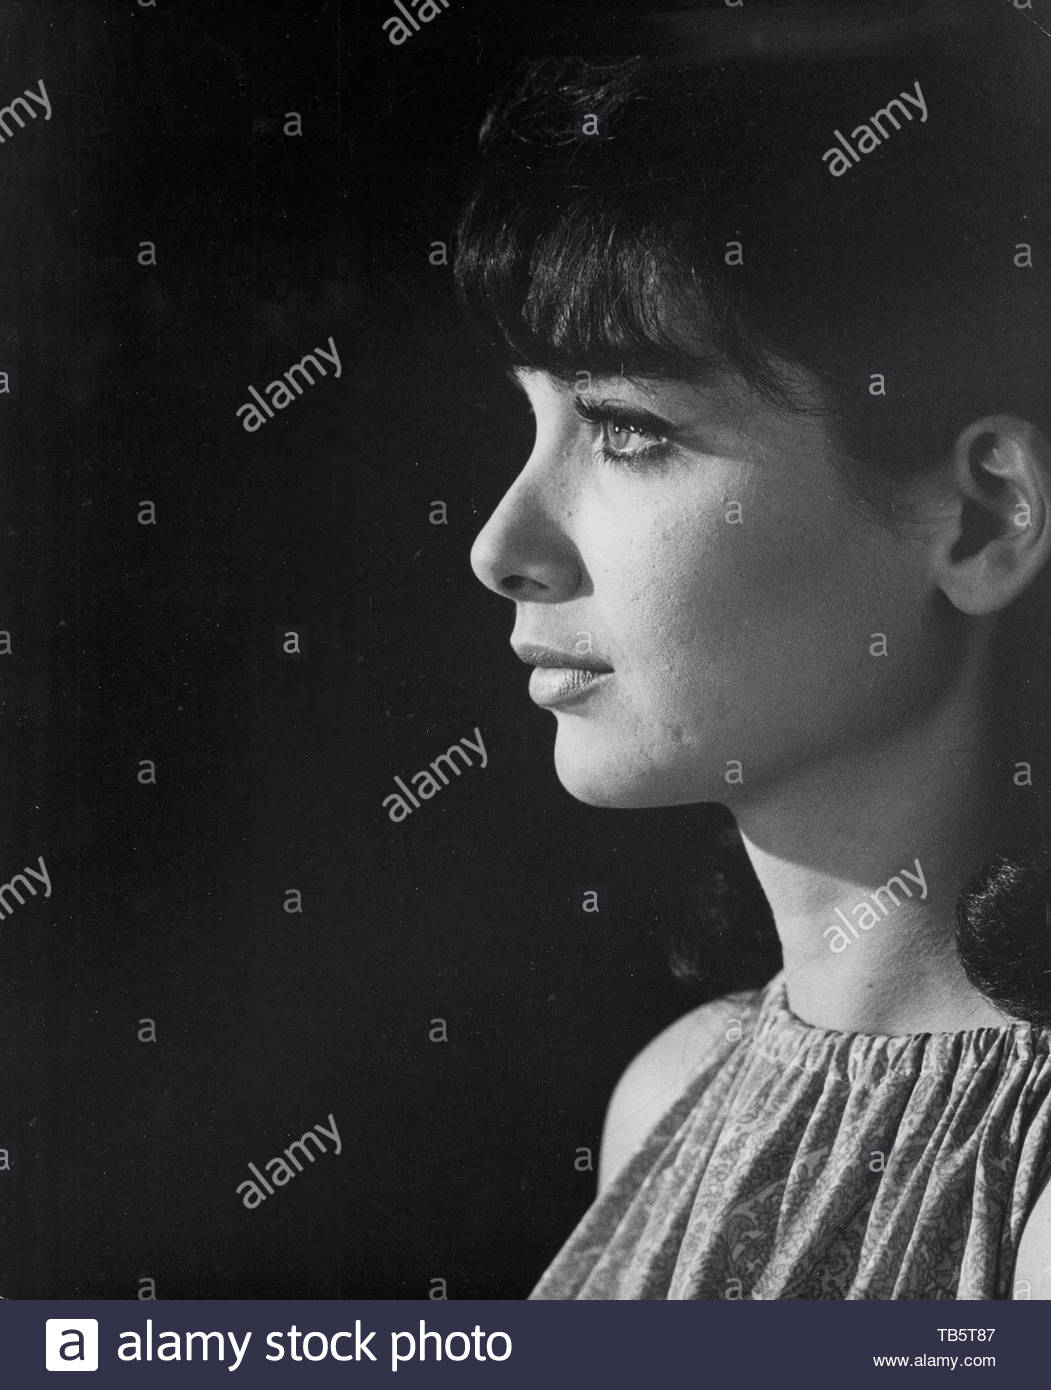 Suzanne Pleshette High Resolution Stock Photography and Images - Alamy